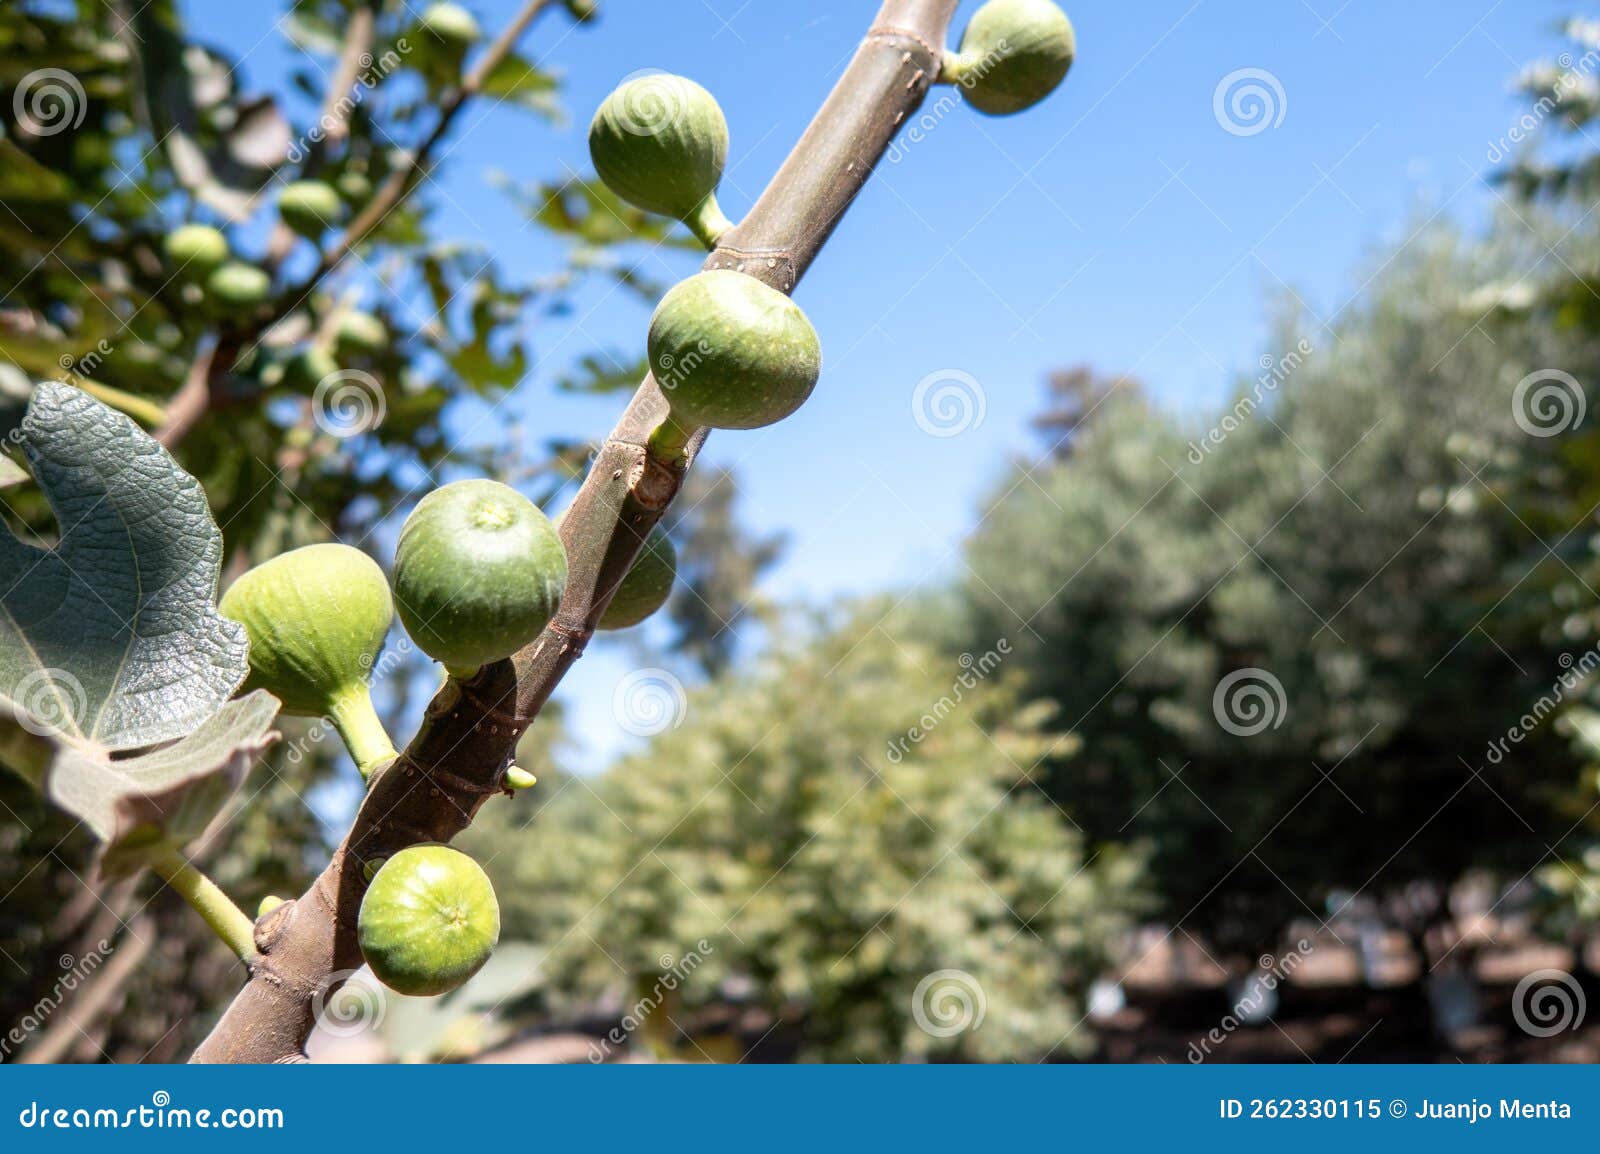 figs growing on a fig tree. nature background